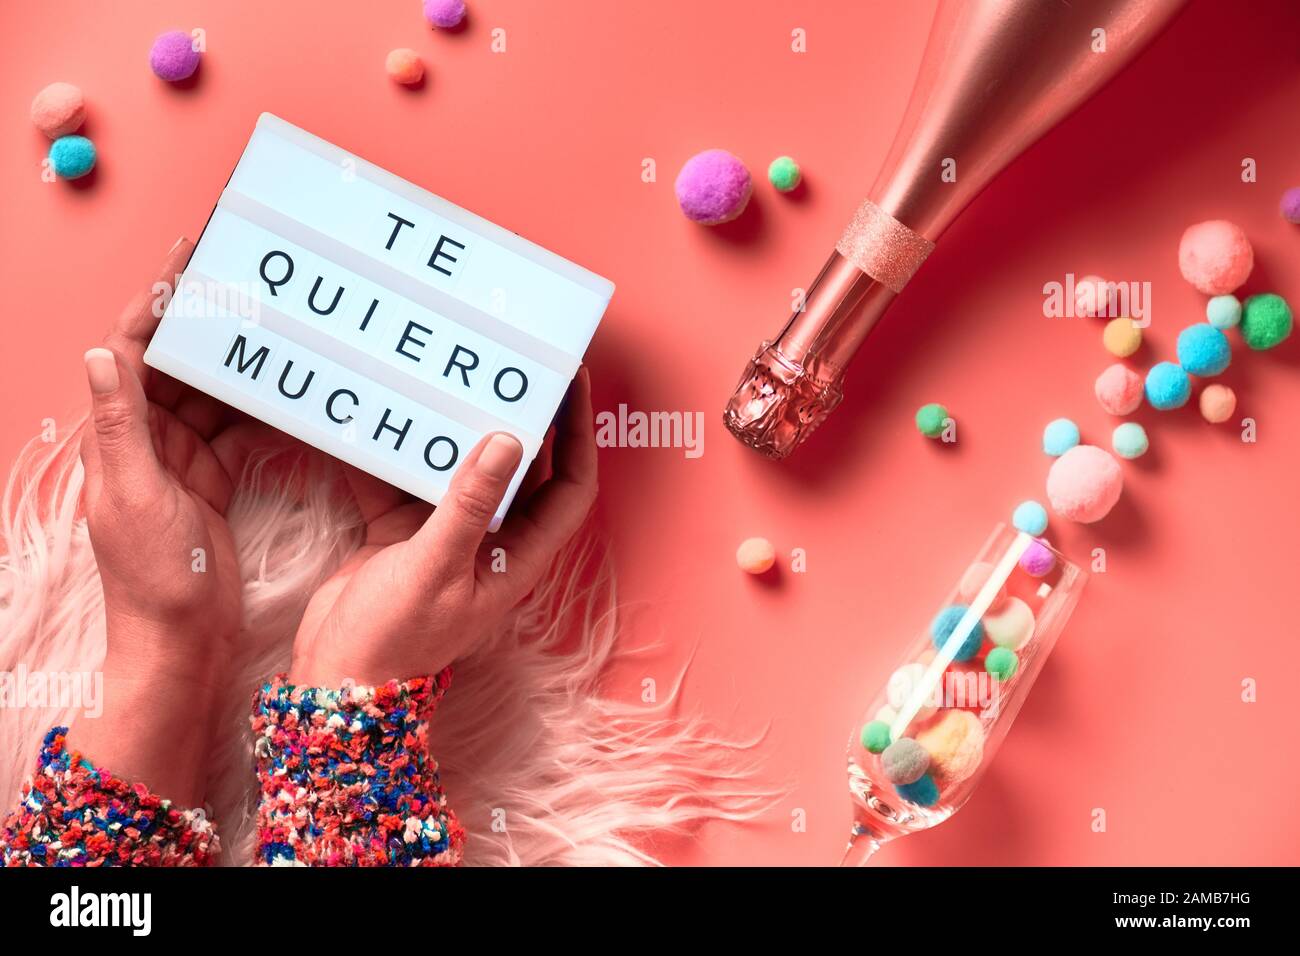 Text 'Te quero mucho' means I love you so much in English. Lightboard with text in Latino female hands, top view on pink background. Bottle of champag Stock Photo